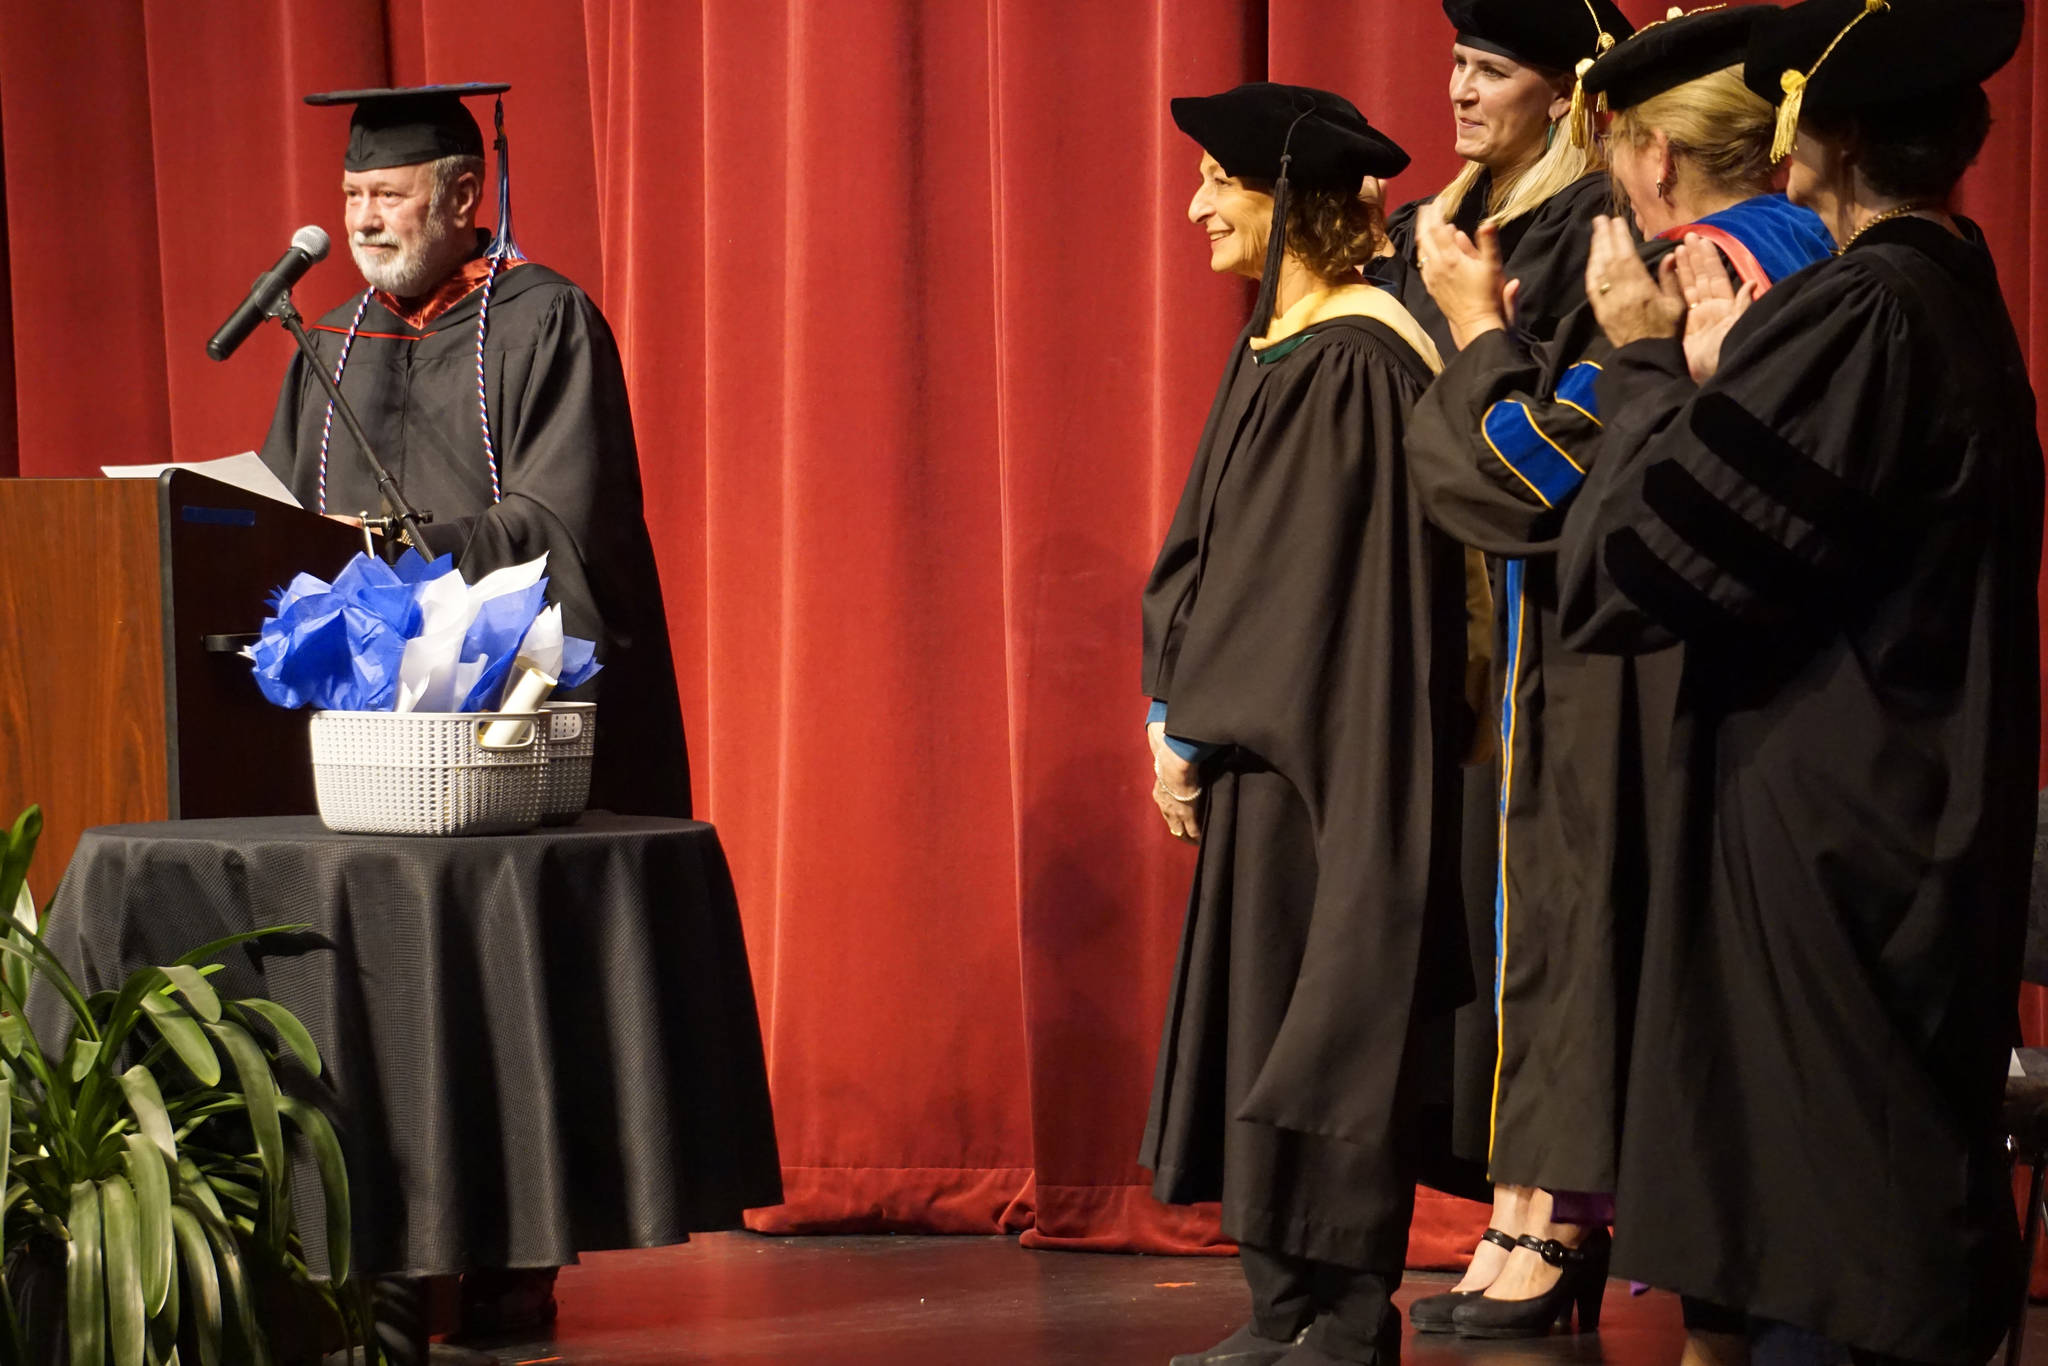 Kenai Peninsula Campus Director Gary Turner, left, reads a commendation awarding the title of Director Emerita to former Kachemak Bay Campus Director Carol Swartz, center, at the Kachemak Bay Campus commencement last Wednesday, May 8, 2019, at the Mariner Theatre in Homer, Alaska. Swartz retired last year. (Photo by Michael Armstrong/Homer News.)